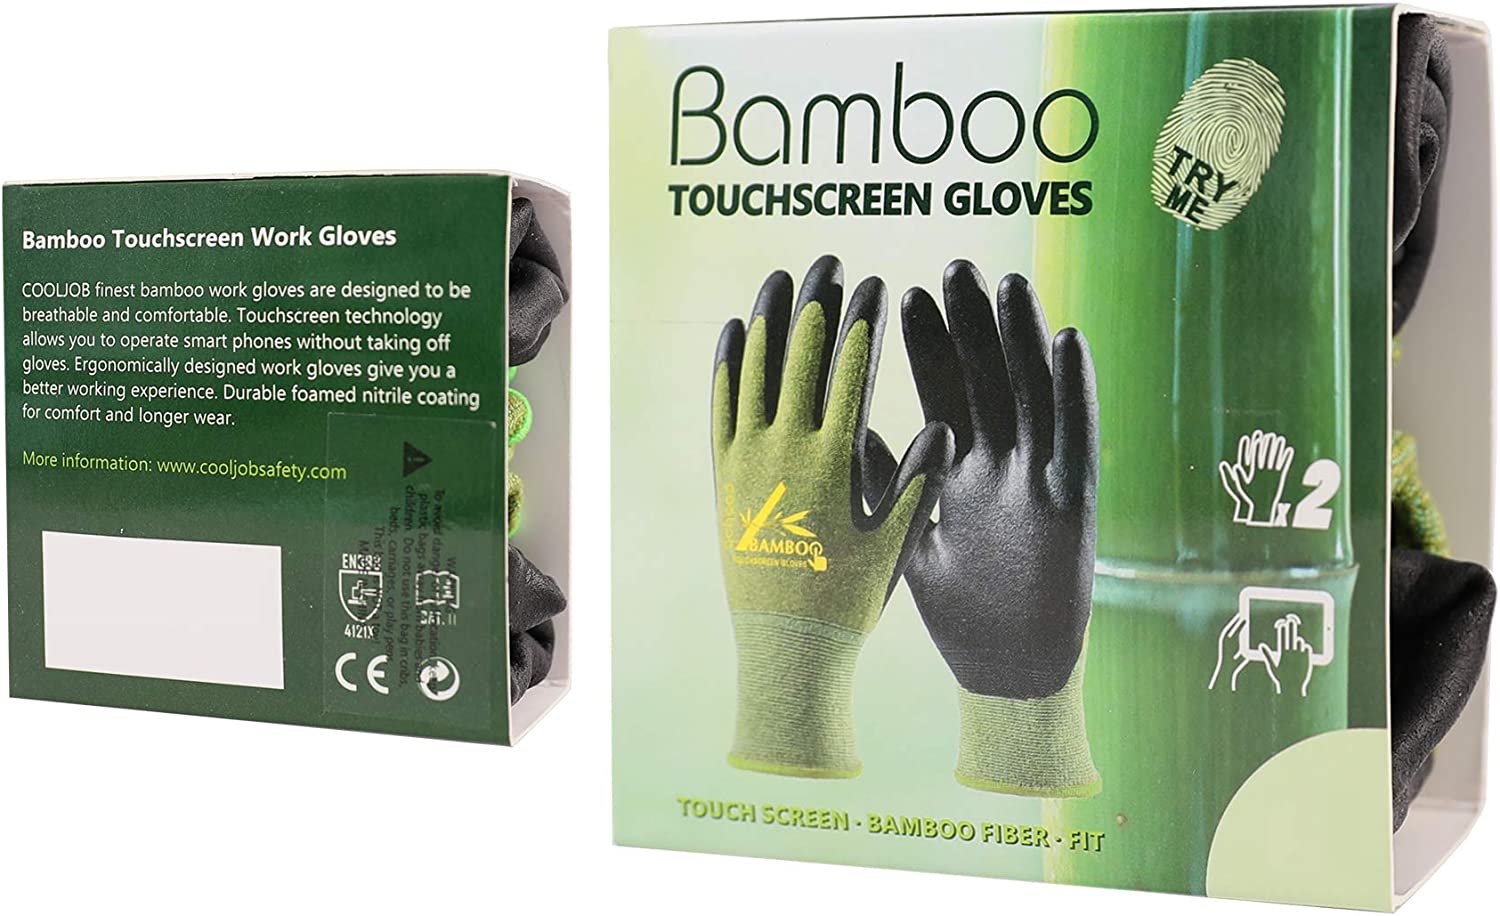 Gardening Gloves Soft Breathable Bamboo Fiber for Comfortable Outdoor Work (2 Pack)